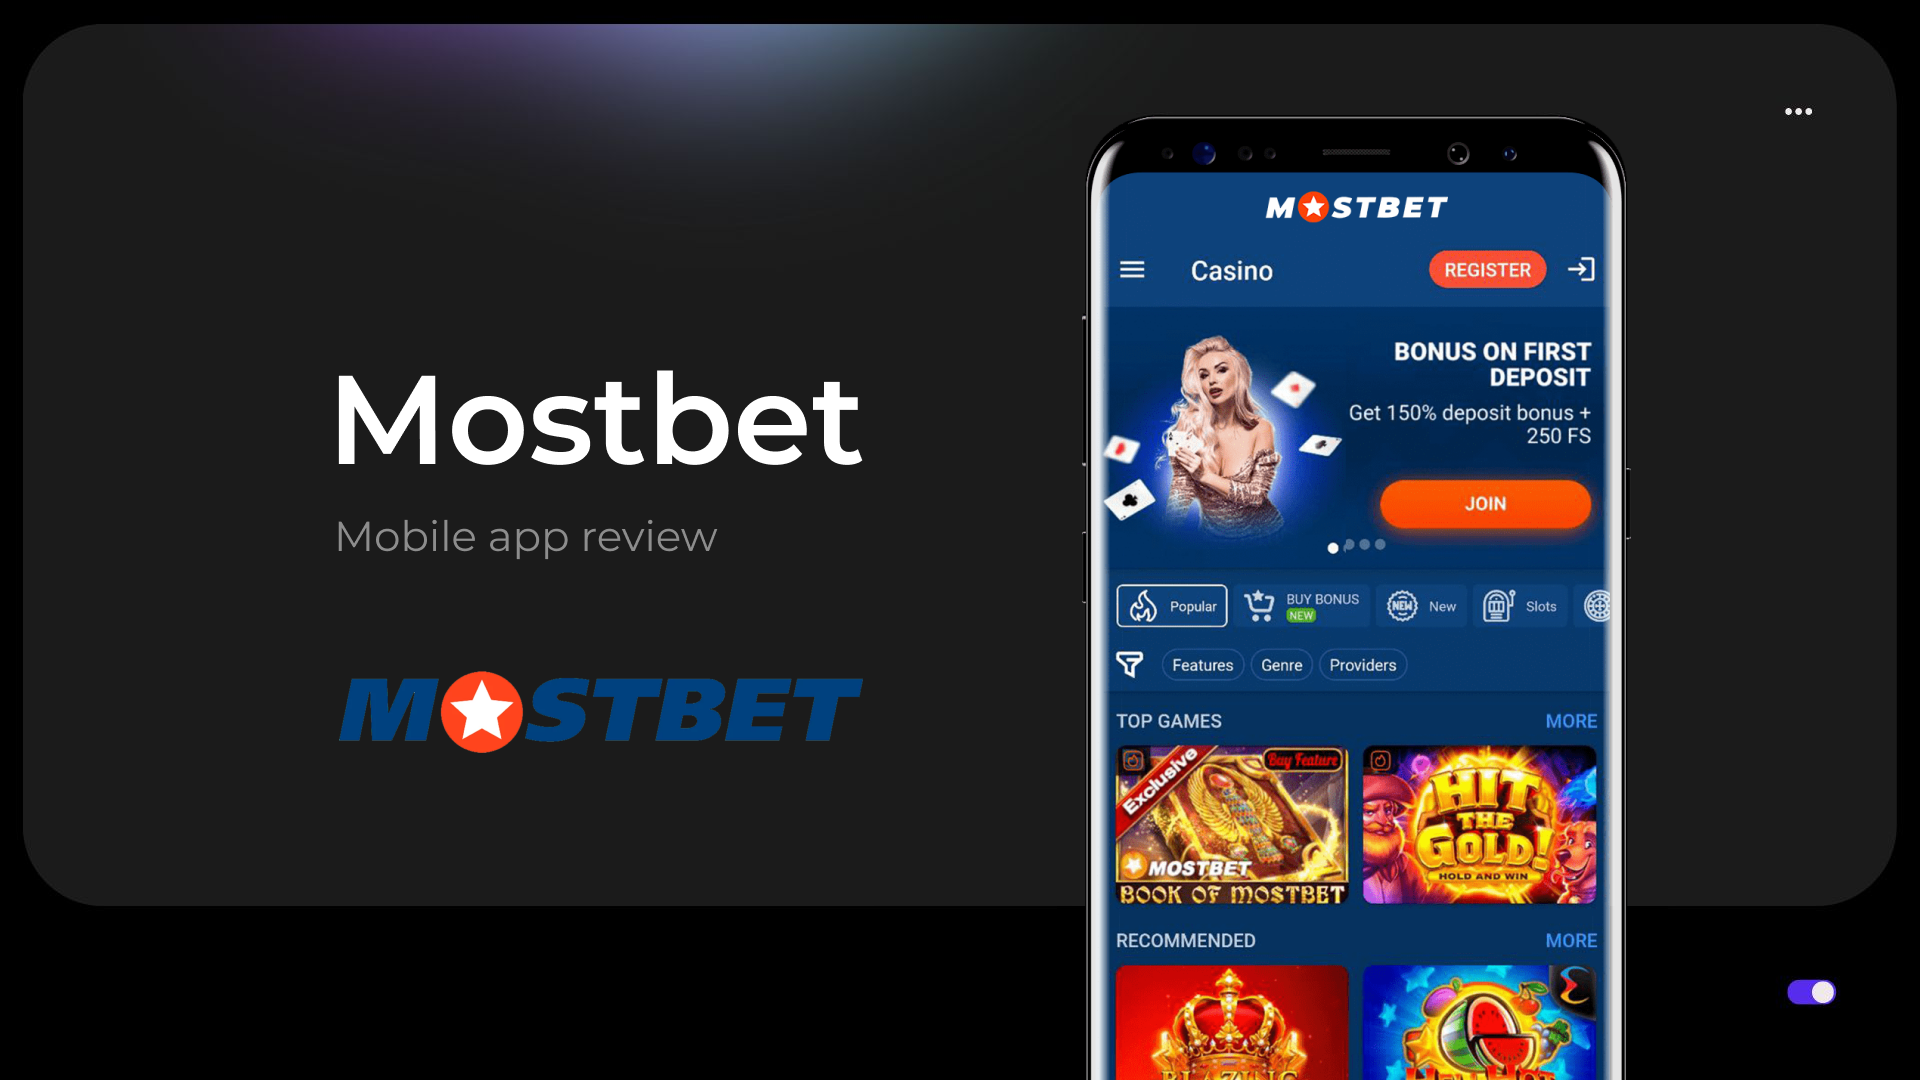 Mostbet App Bangladesh - How to Get and Use it